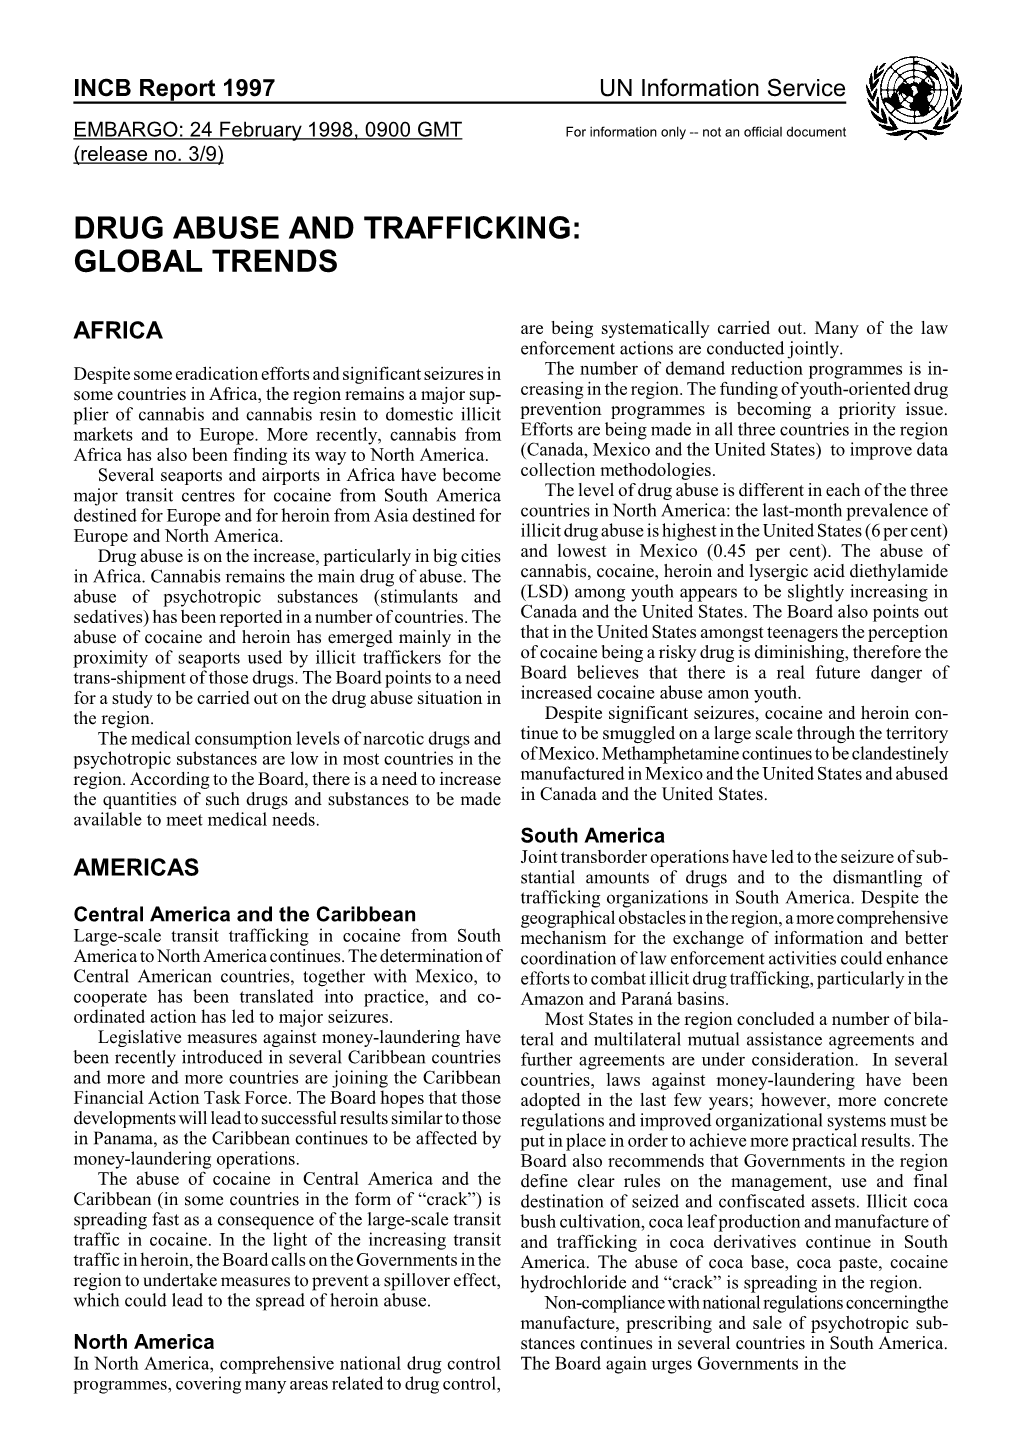 Drug Abuse and Trafficking: Global Trends